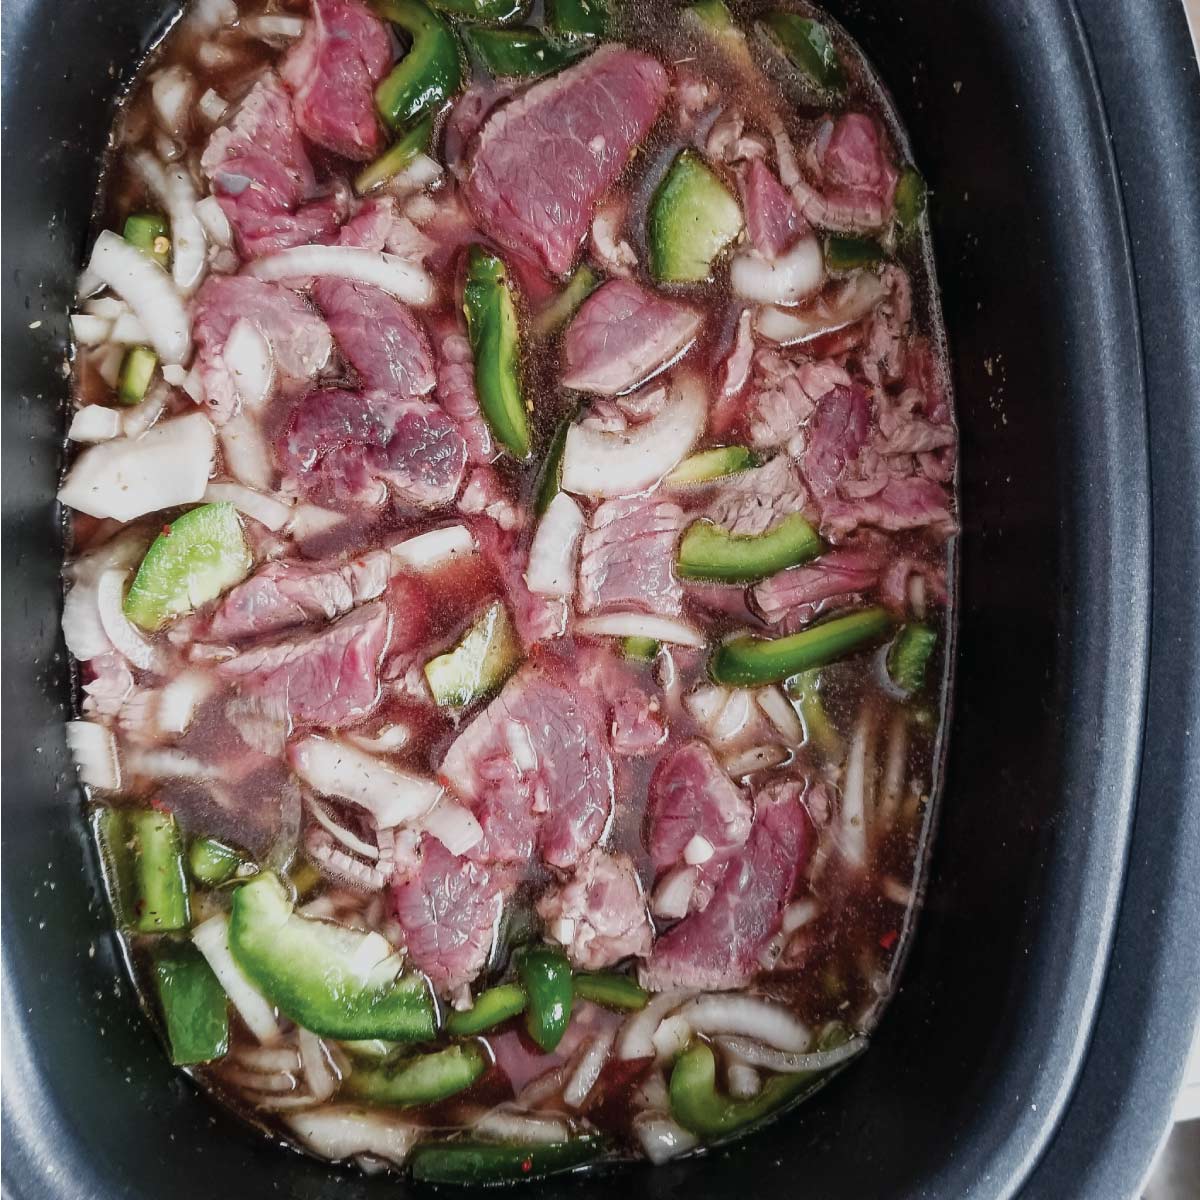 Beef, peppers, onions, seasoning and broth in the slow cooker just before cooking.